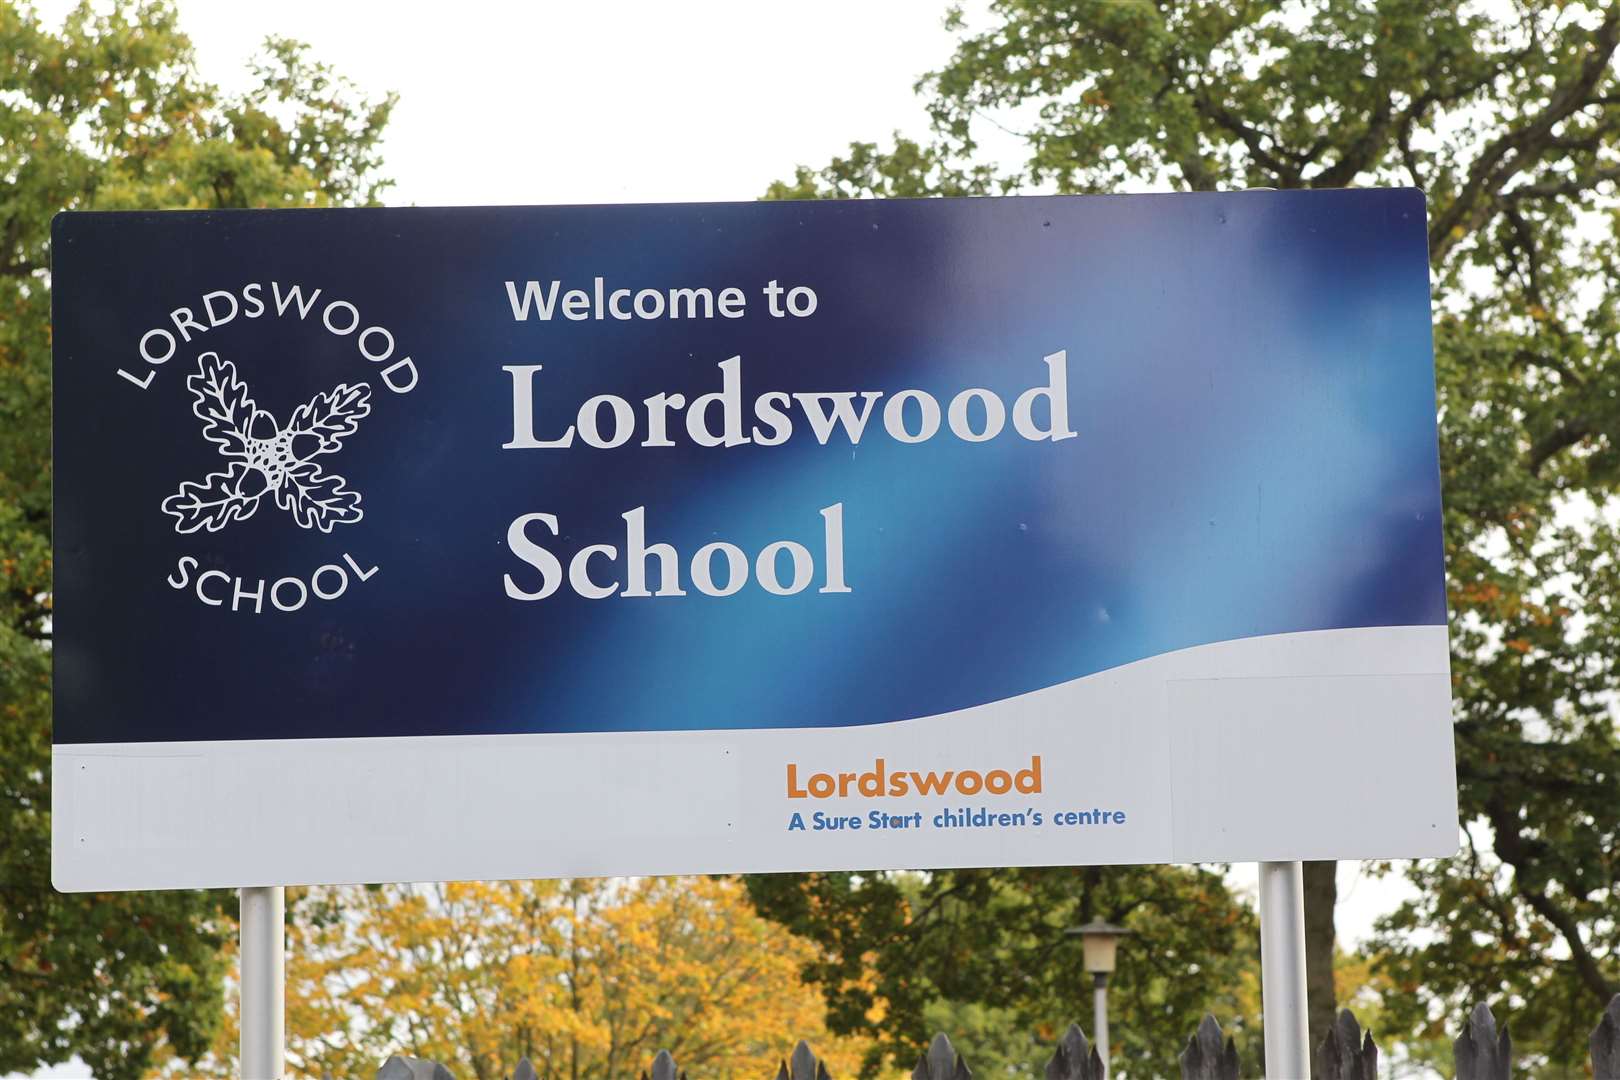 Lordswood School has requested a police presence